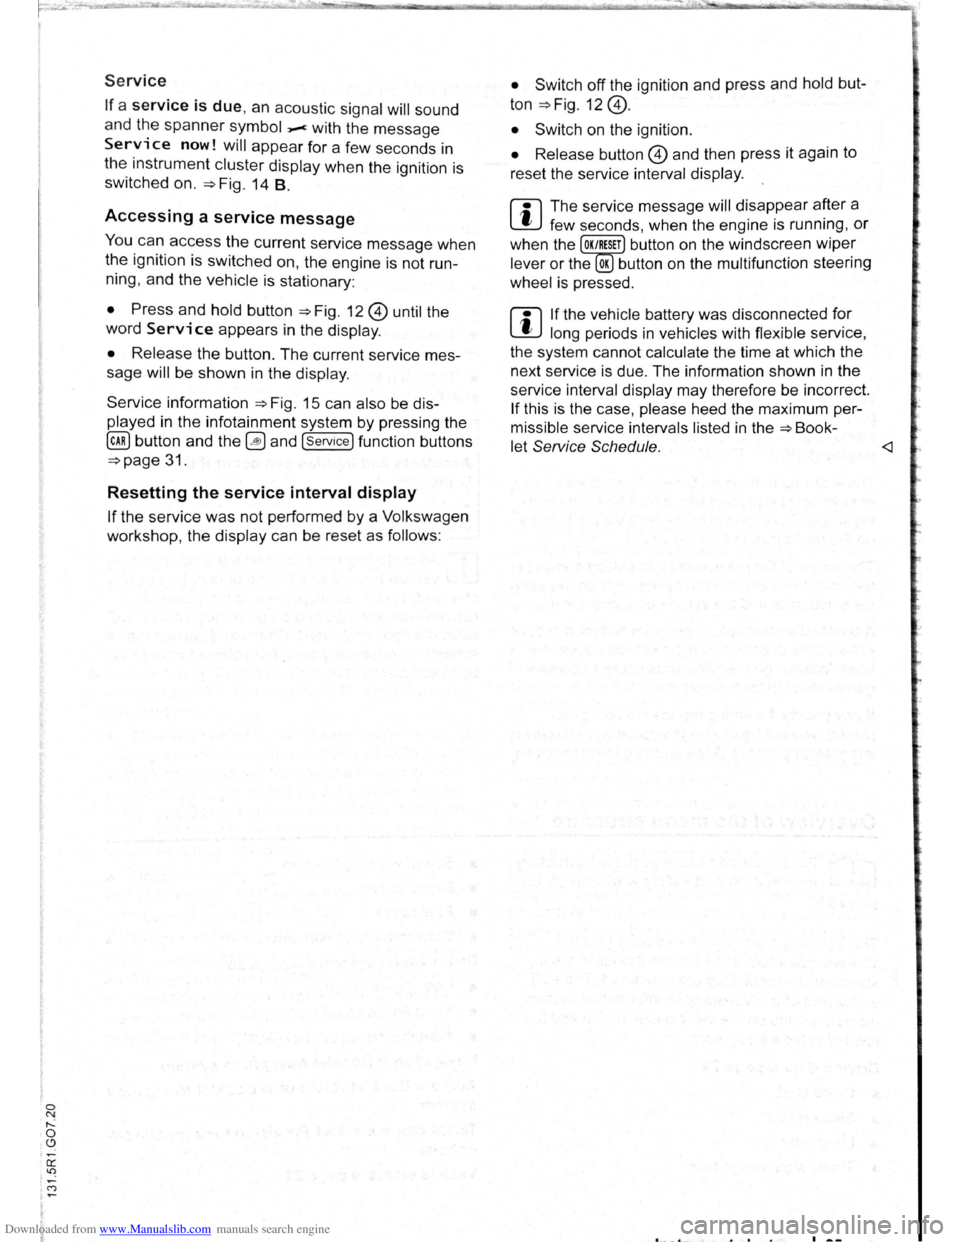 VOLKSWAGEN SCIROCCO 2008  Owners Manual Downloaded from www.Manualslib.com manuals search engine 0 N ,....: 0 .C) 
Service 
If a service is due, an acoustic signal will sound 
and the spanner symbol _.c with the message 
Service now! will a